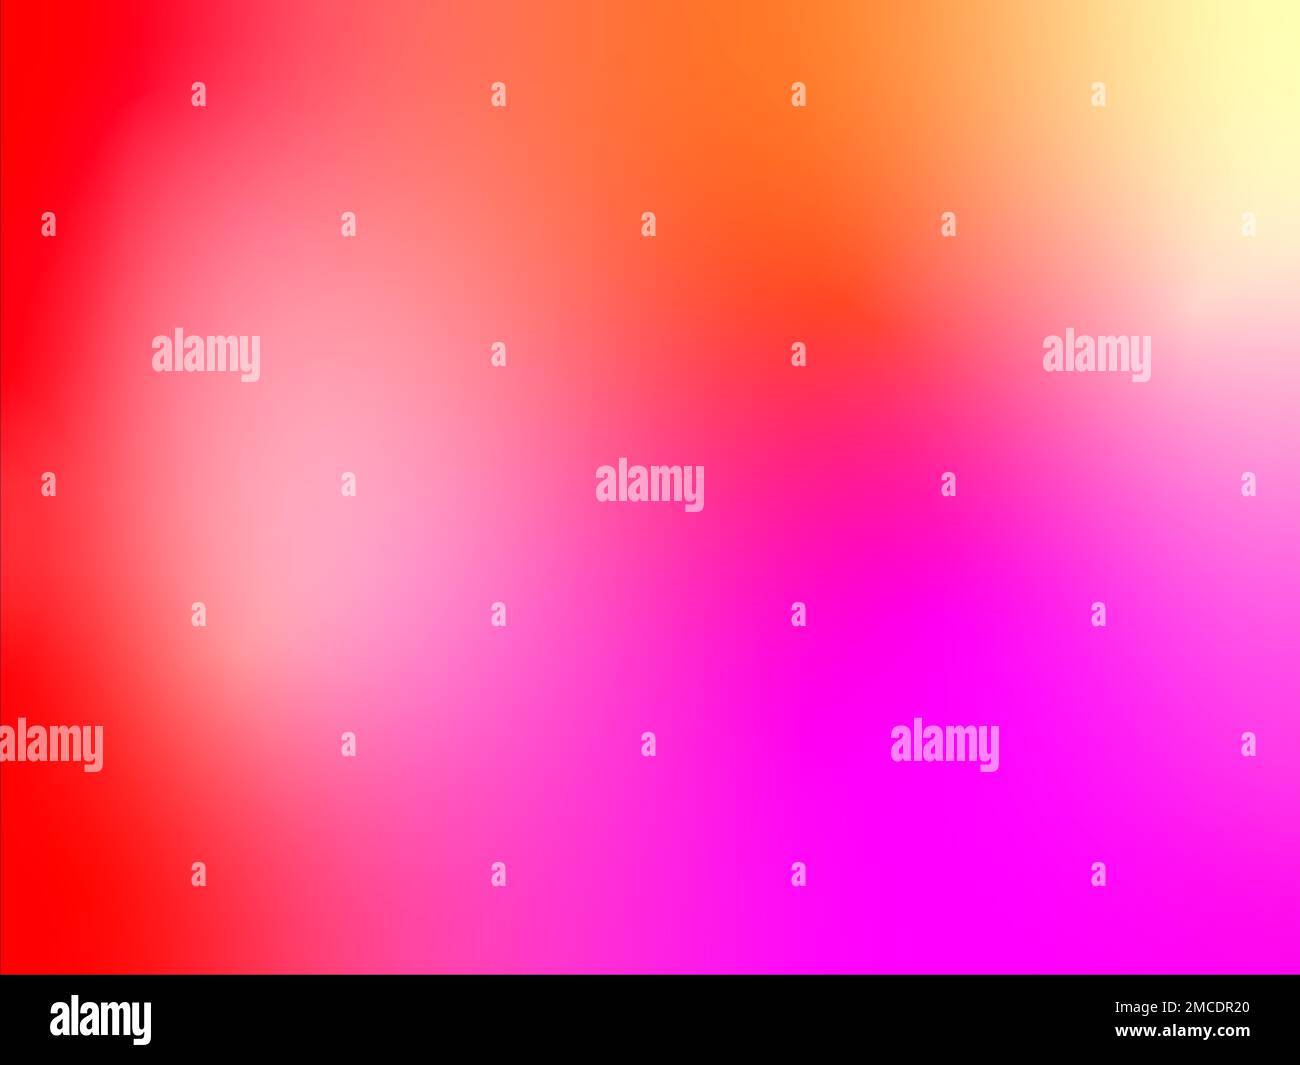 Colour gradient, mesh gradient, abstract background, image, bright, colours, red, fuchsia, magenta, pink, orange, yellow, illustration Stock Photo